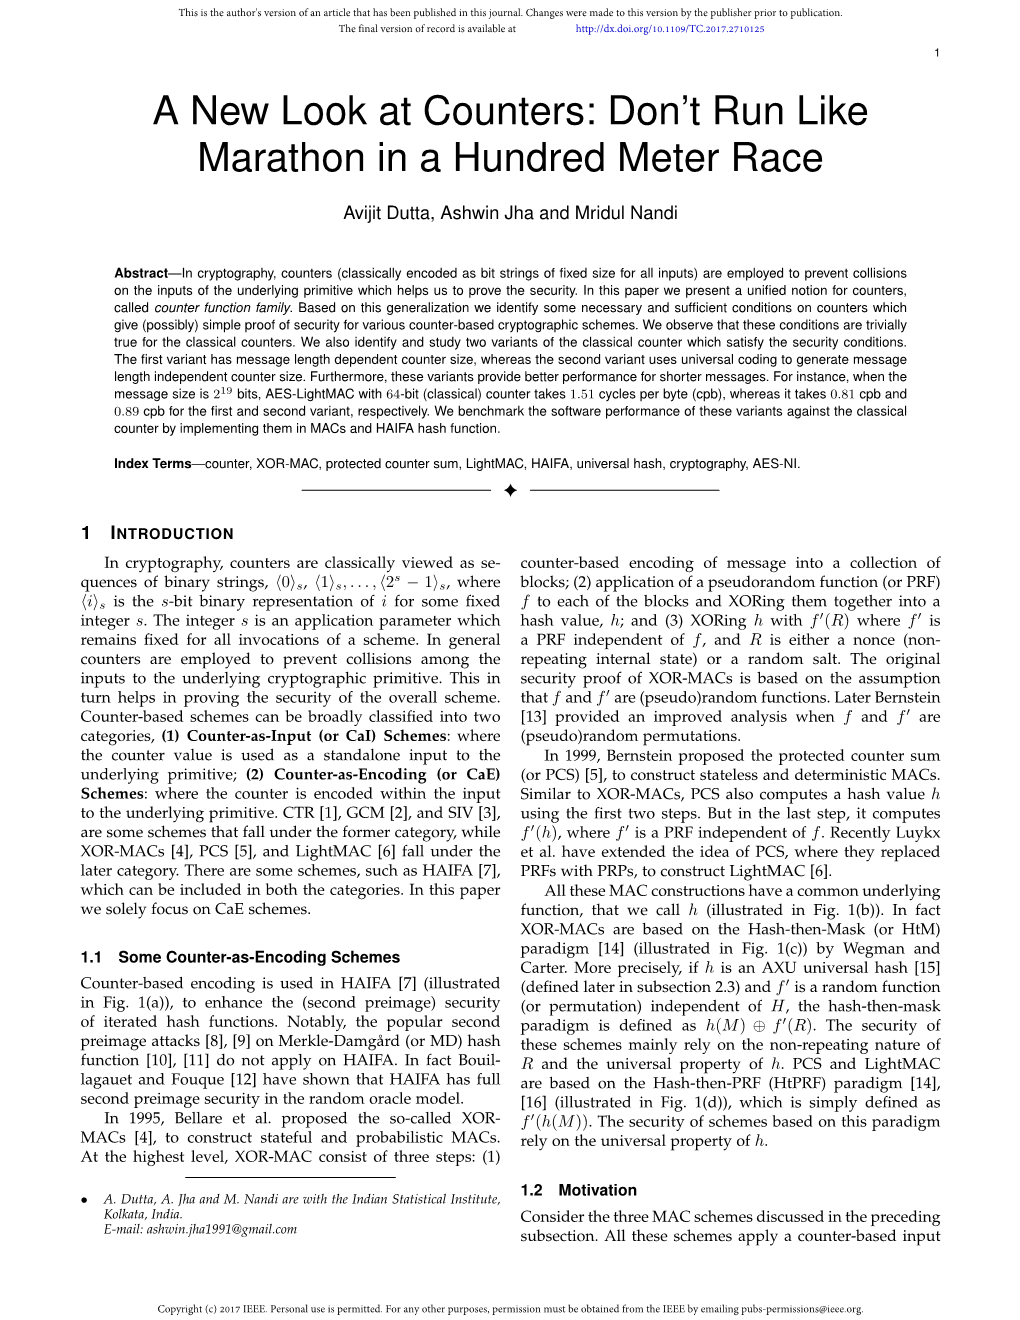 A New Look at Counters: Don't Run Like Marathon in a Hundred Meter Race